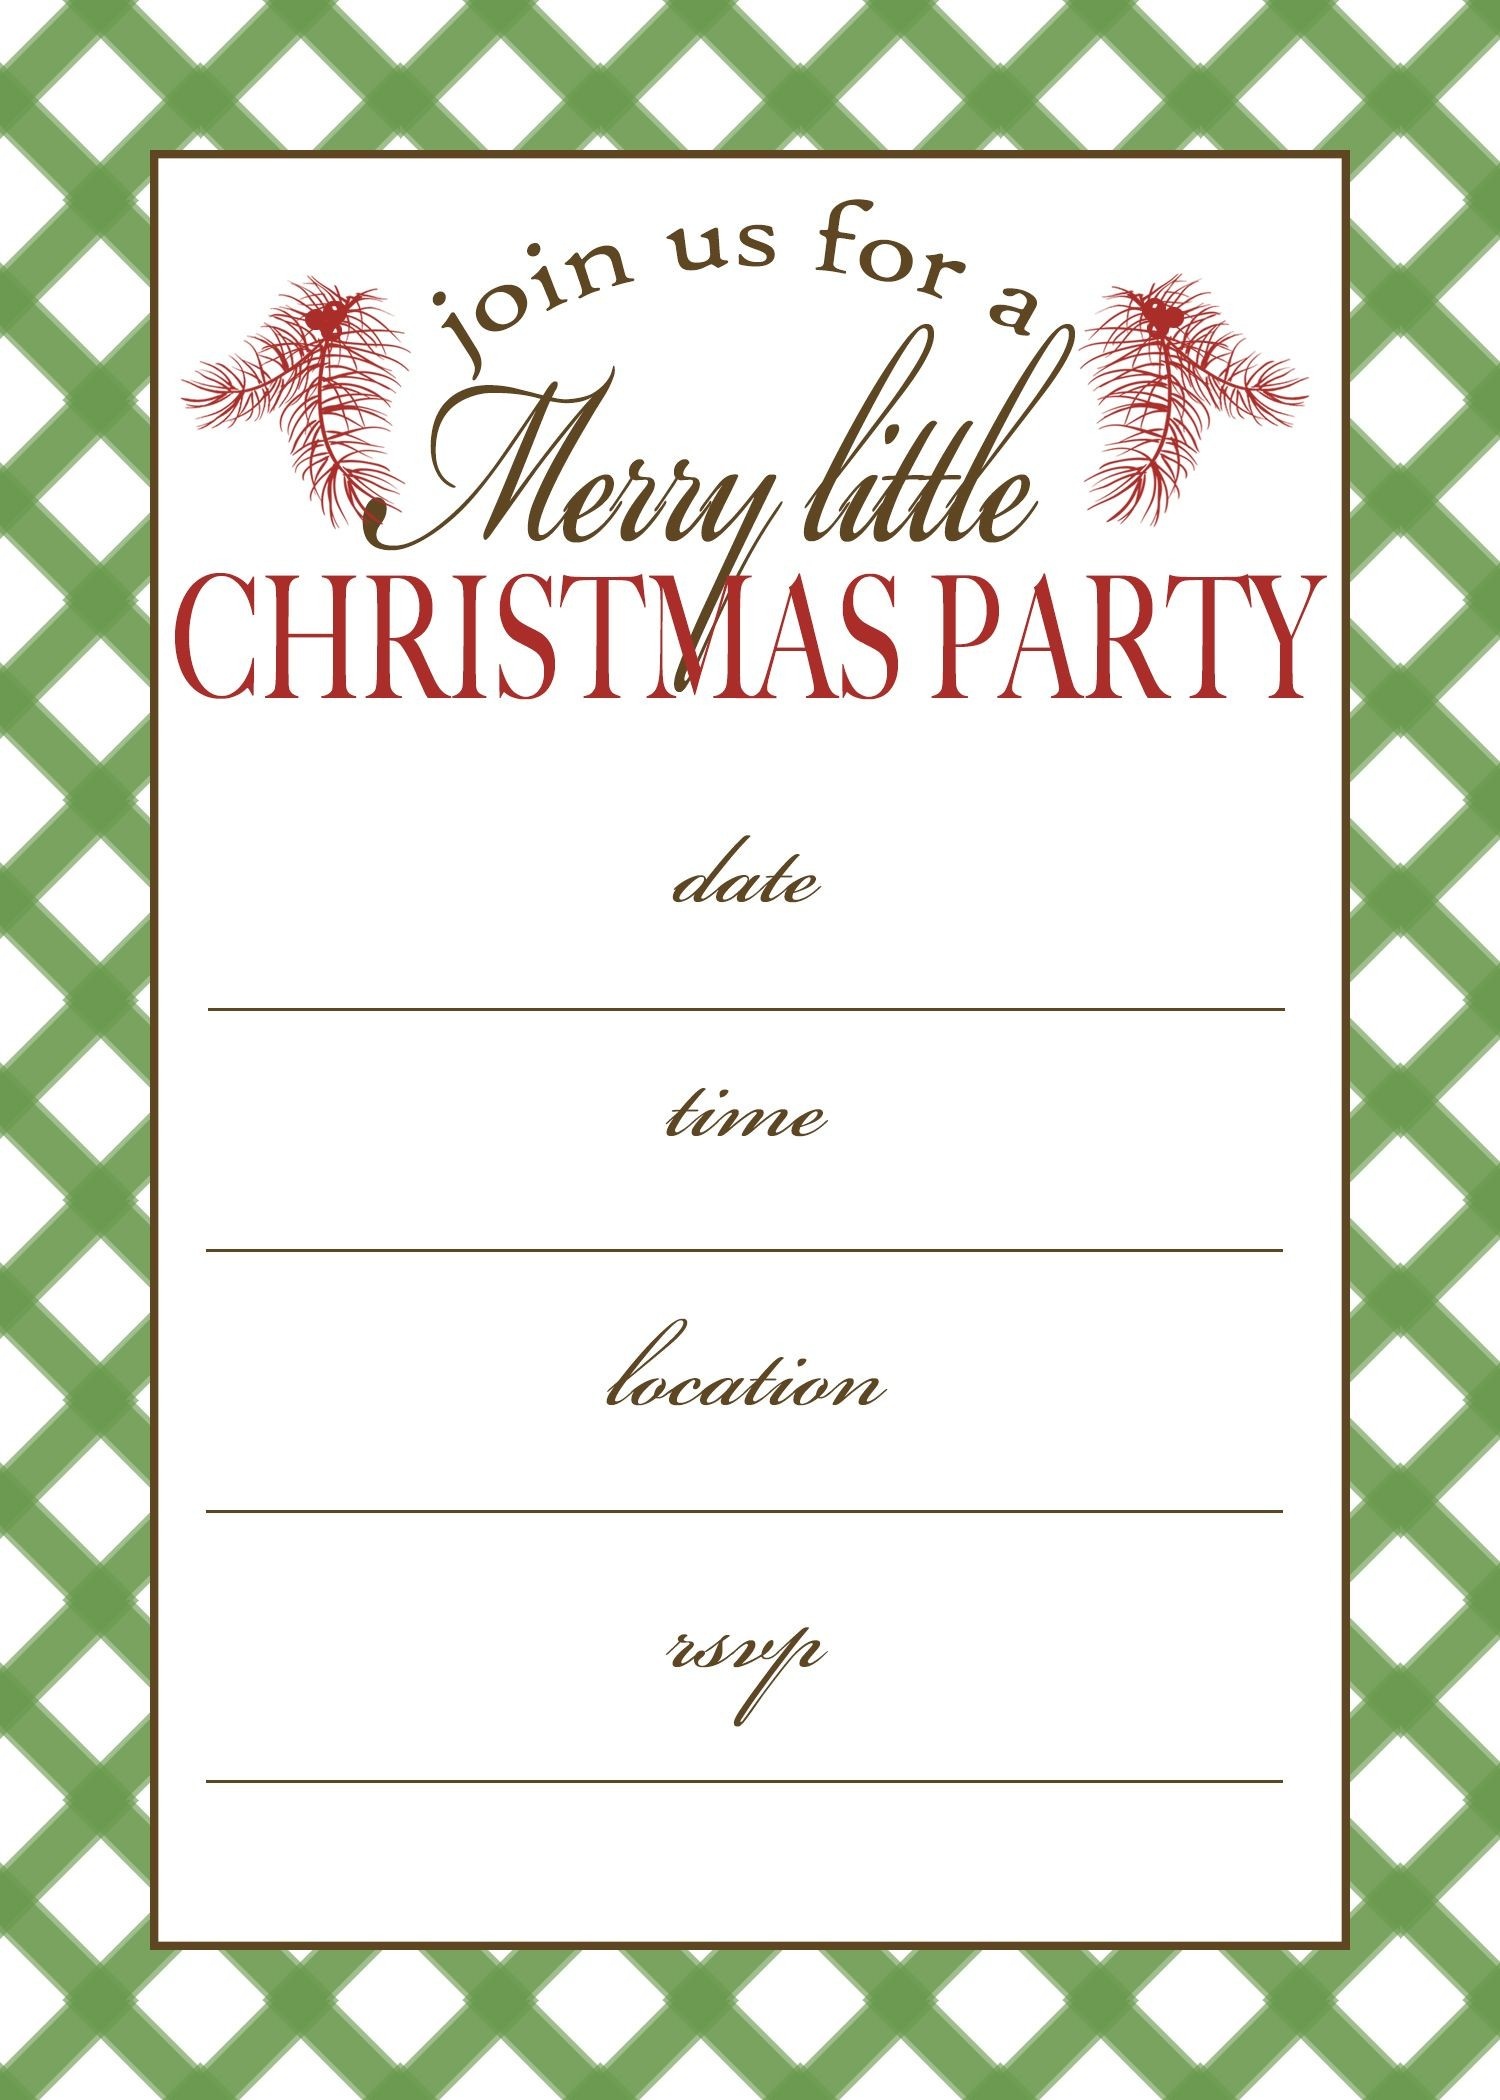 Free Printable Christmas Party Invitations Templates - Loveandrespect - Free Printable Personalized Christmas Invitations